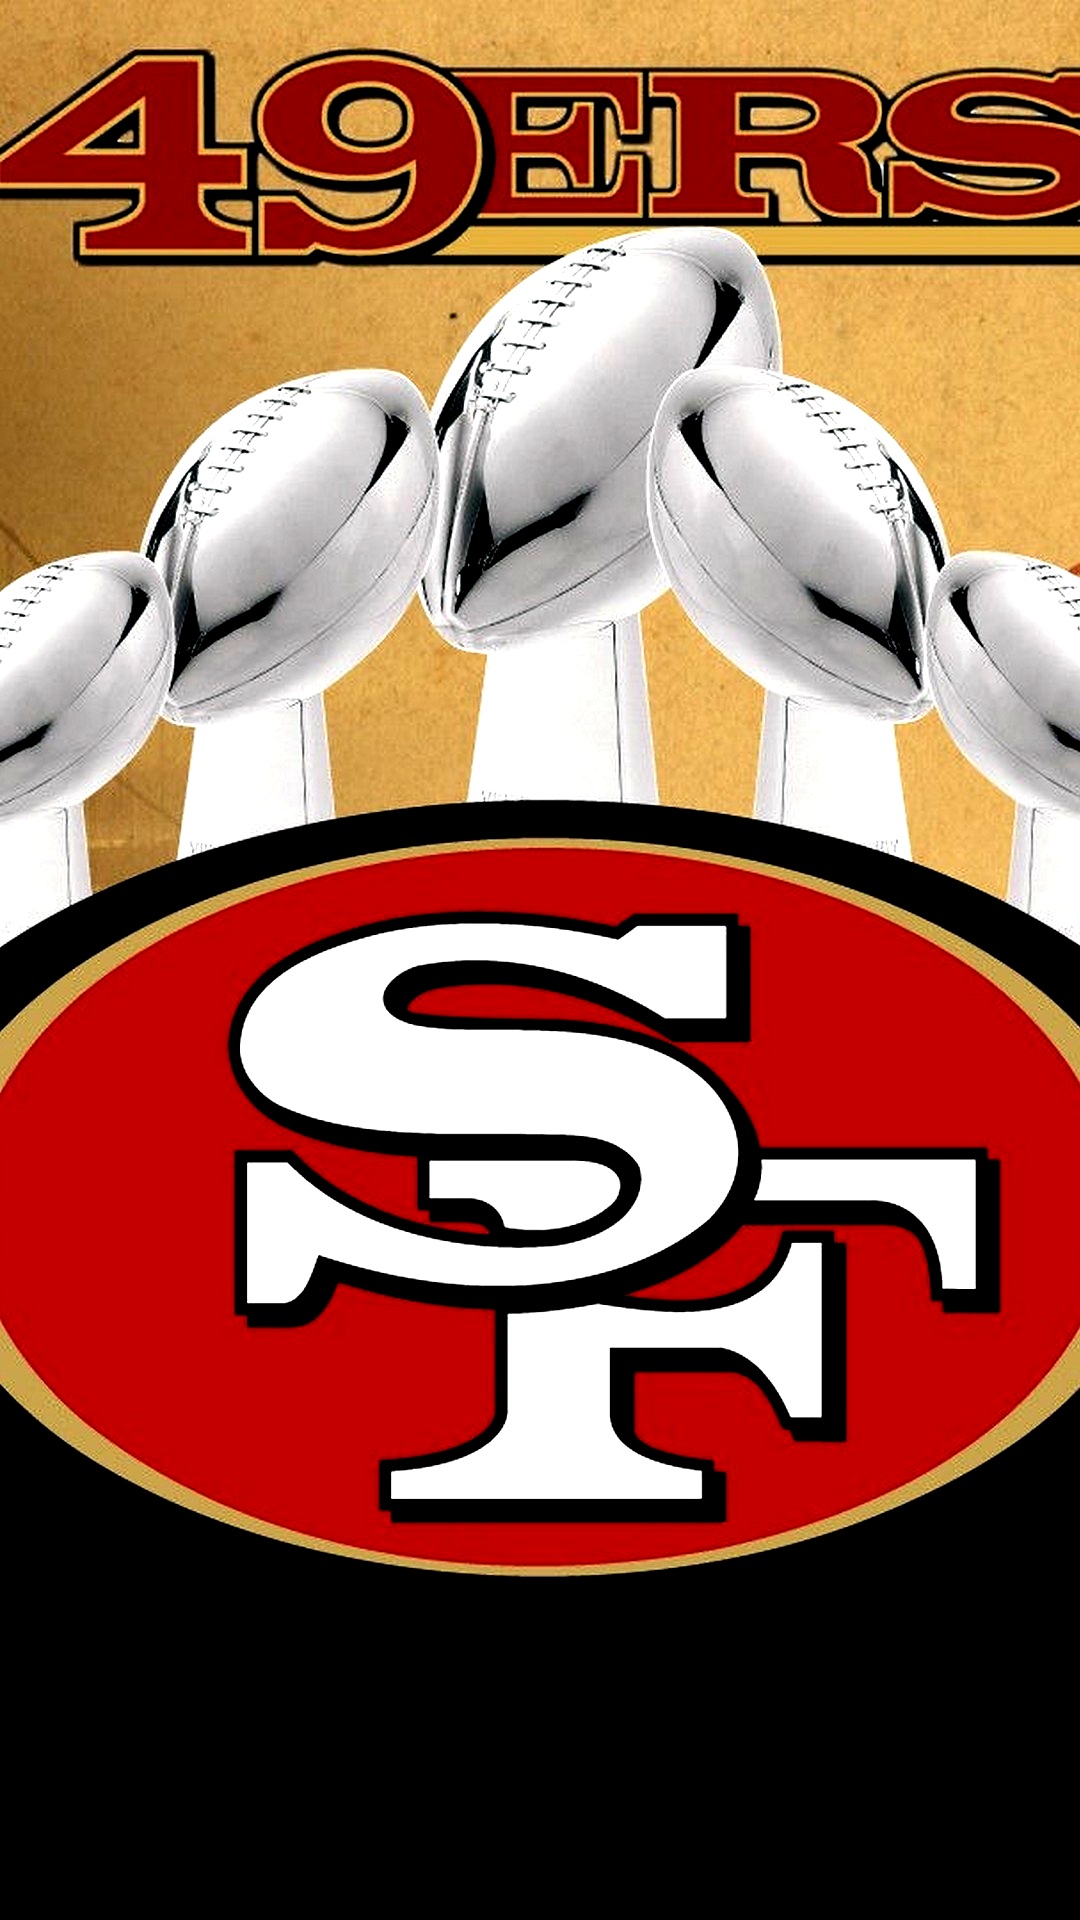 Screensaver iPhone San Francisco 49ers With high-resolution 1080X1920 pixel. Donwload and set as wallpaper for your iPhone X, iPhone XS home screen backgrounds, XS Max, XR, iPhone8 lock screen wallpaper, iPhone 7, 6, SE, and other mobile devices